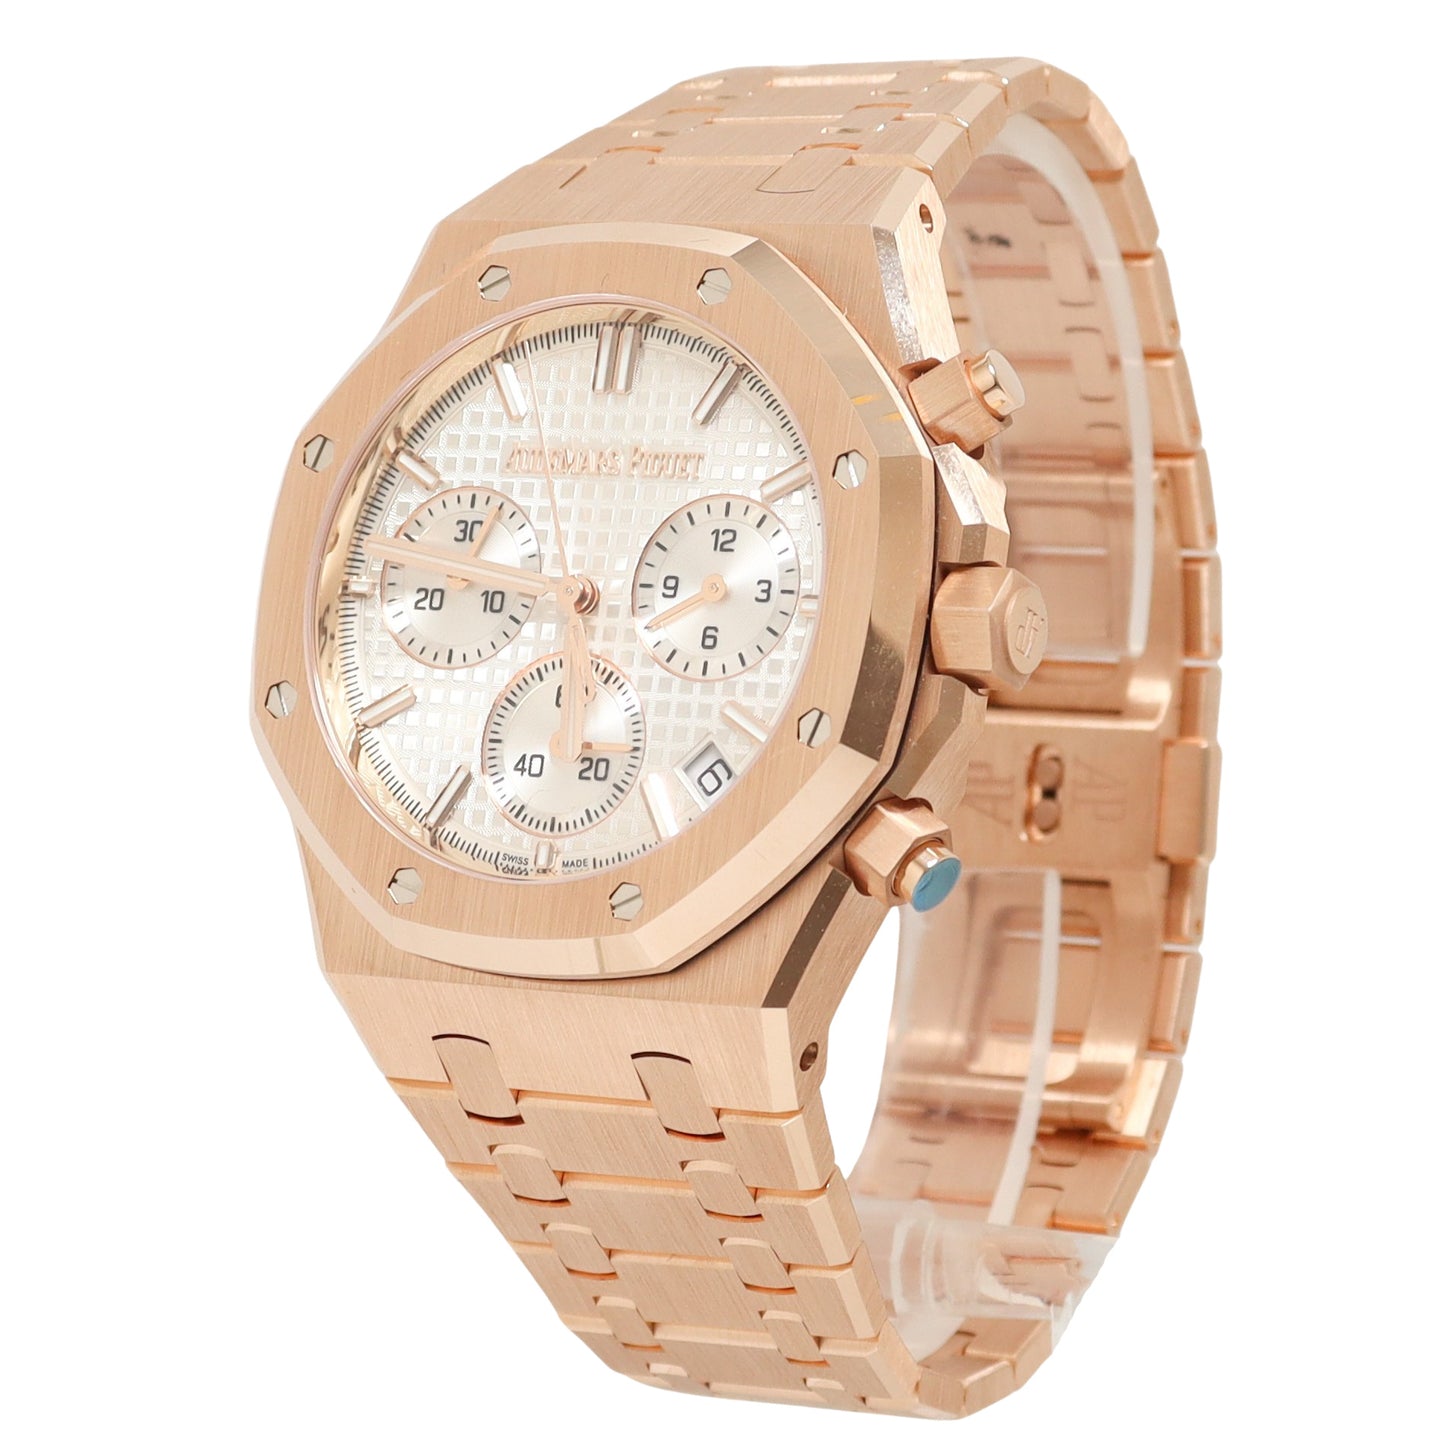 Audemar's Piguet Mens Rose Gold 41mm Silver Toned Grande Tapisserie Dial Watch Reference# 26240OR.OO.1320OR.03 - Happy Jewelers Fine Jewelry Lifetime Warranty